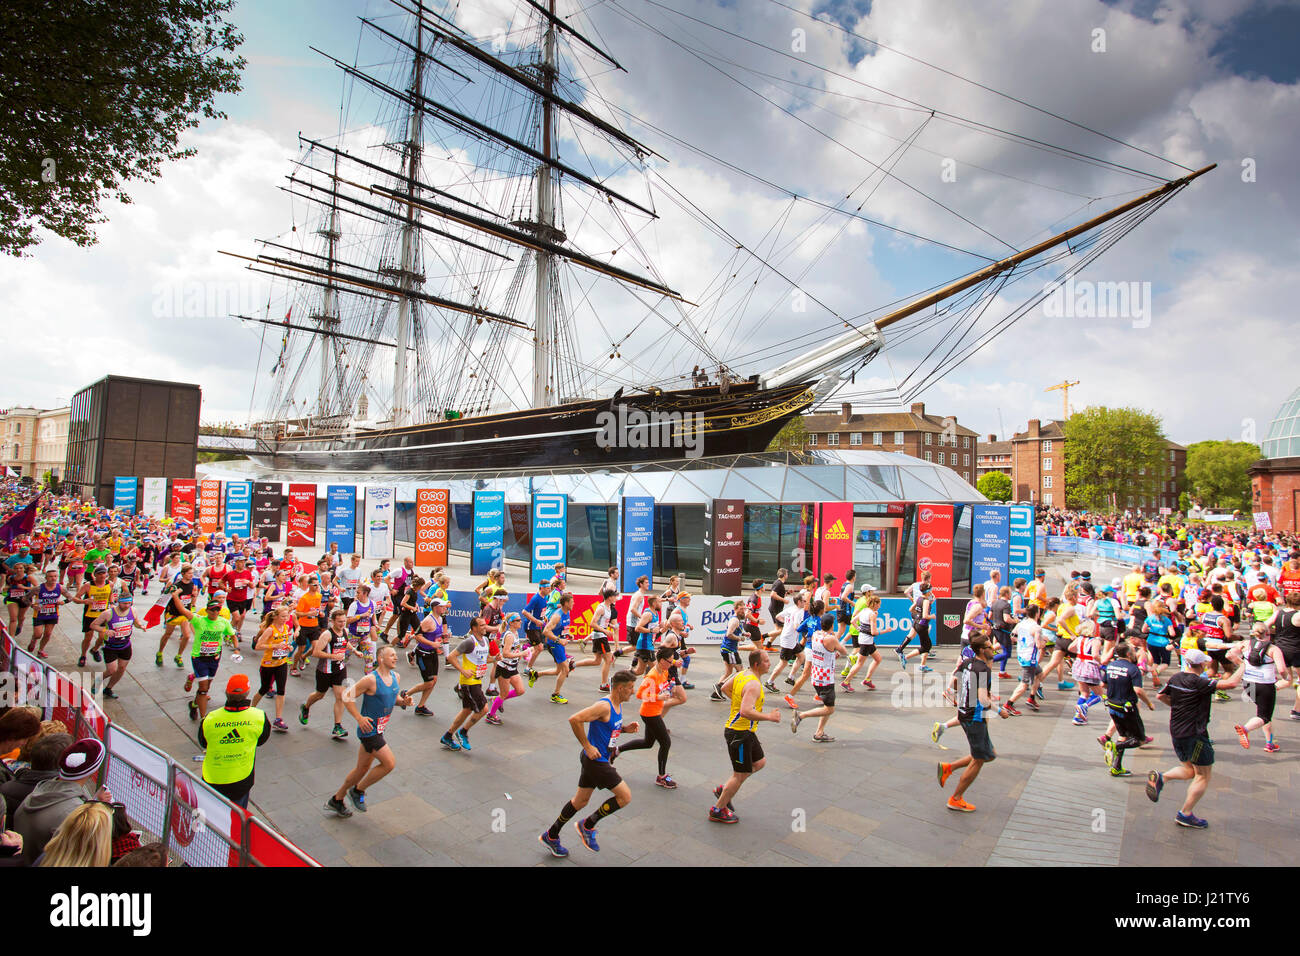 London, UK. 23rd April, 2017. Participants take part in the Virgin London Marathon 2017. Pictured passing Cutty Sark. Credit: Oliver Dixon/Alamy Live News Stock Photo